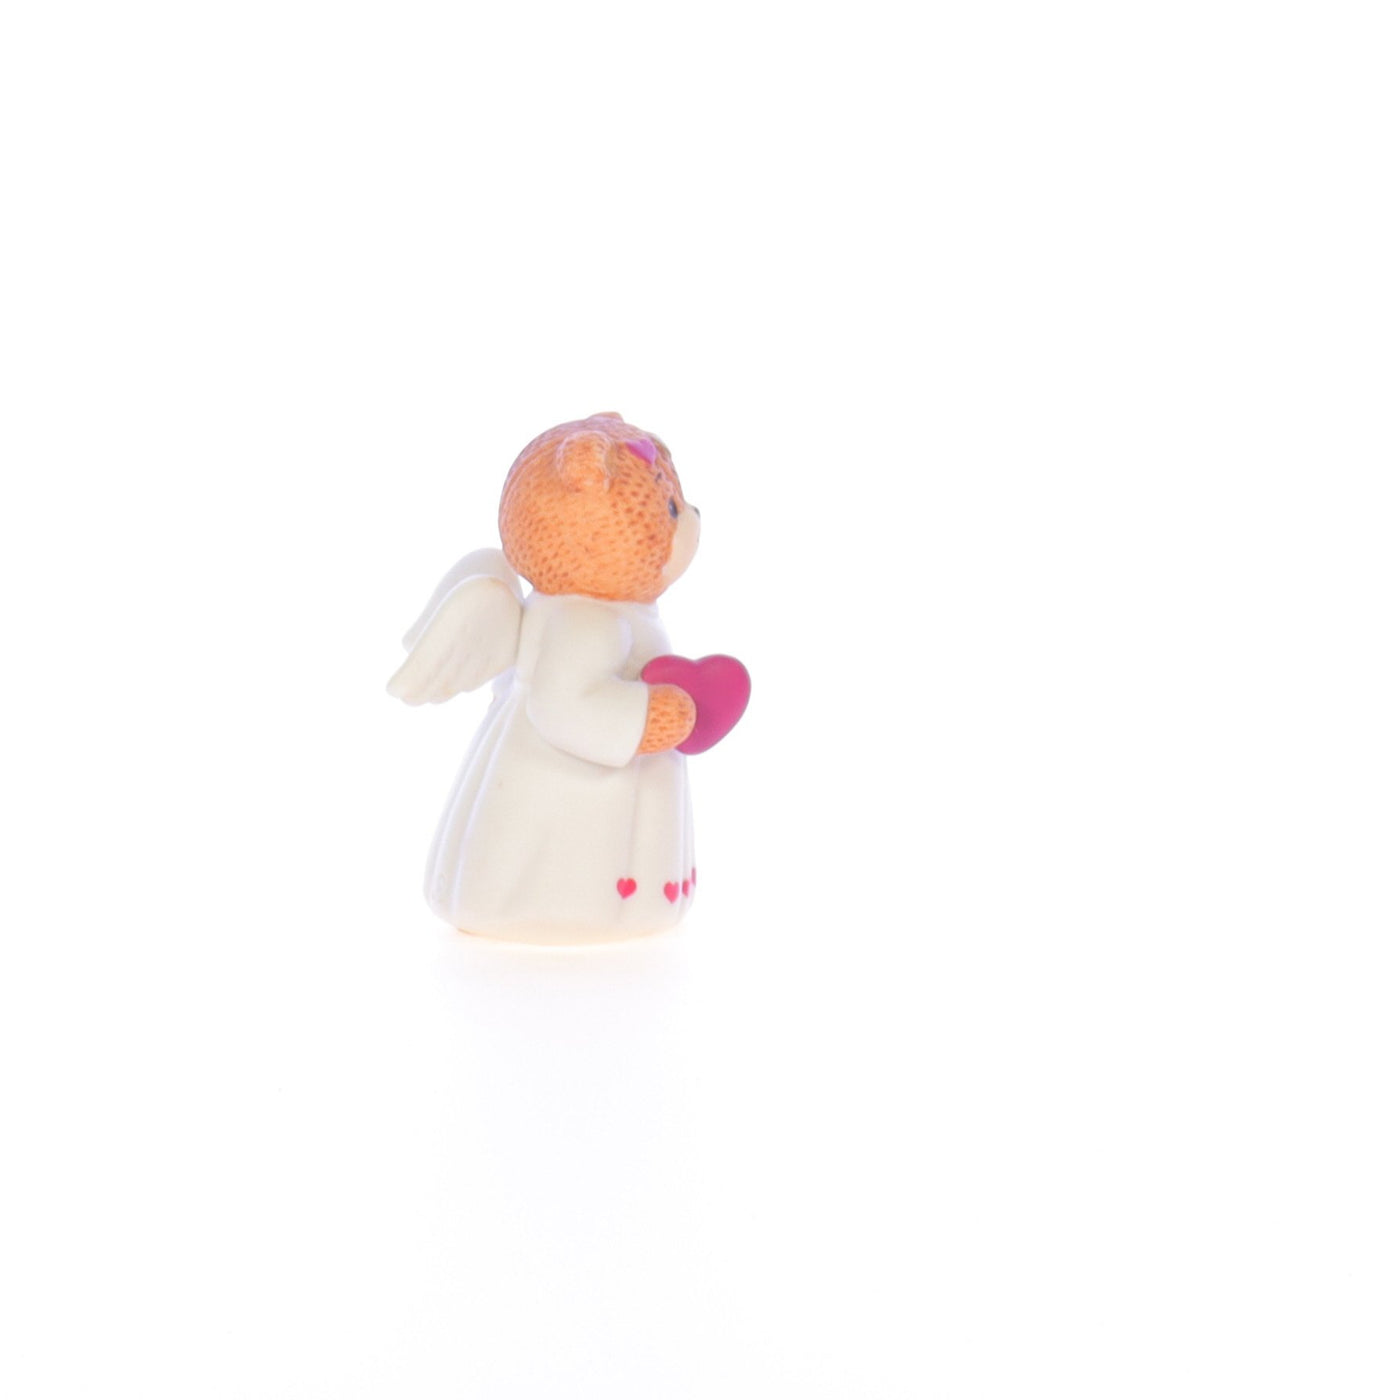 Lucy_And_Me_by_Lucy_Atwell_Porcelain_Figurine_Angel_of_Love_Bear_Lucy_Unknown_049_07